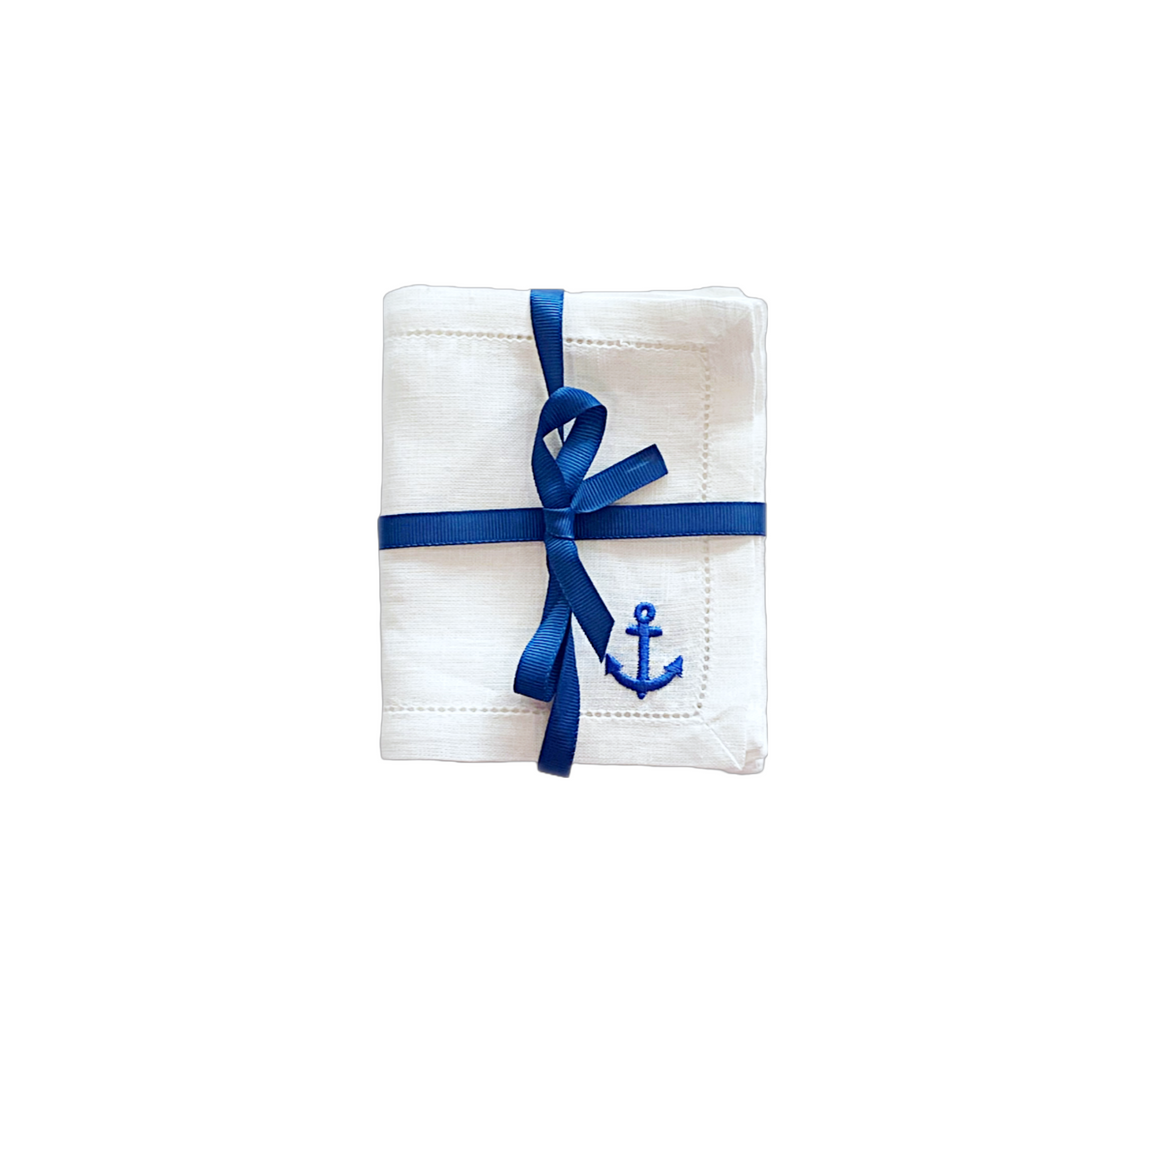 Set of 6 White Cocktail Napkin With Blue anchor Design